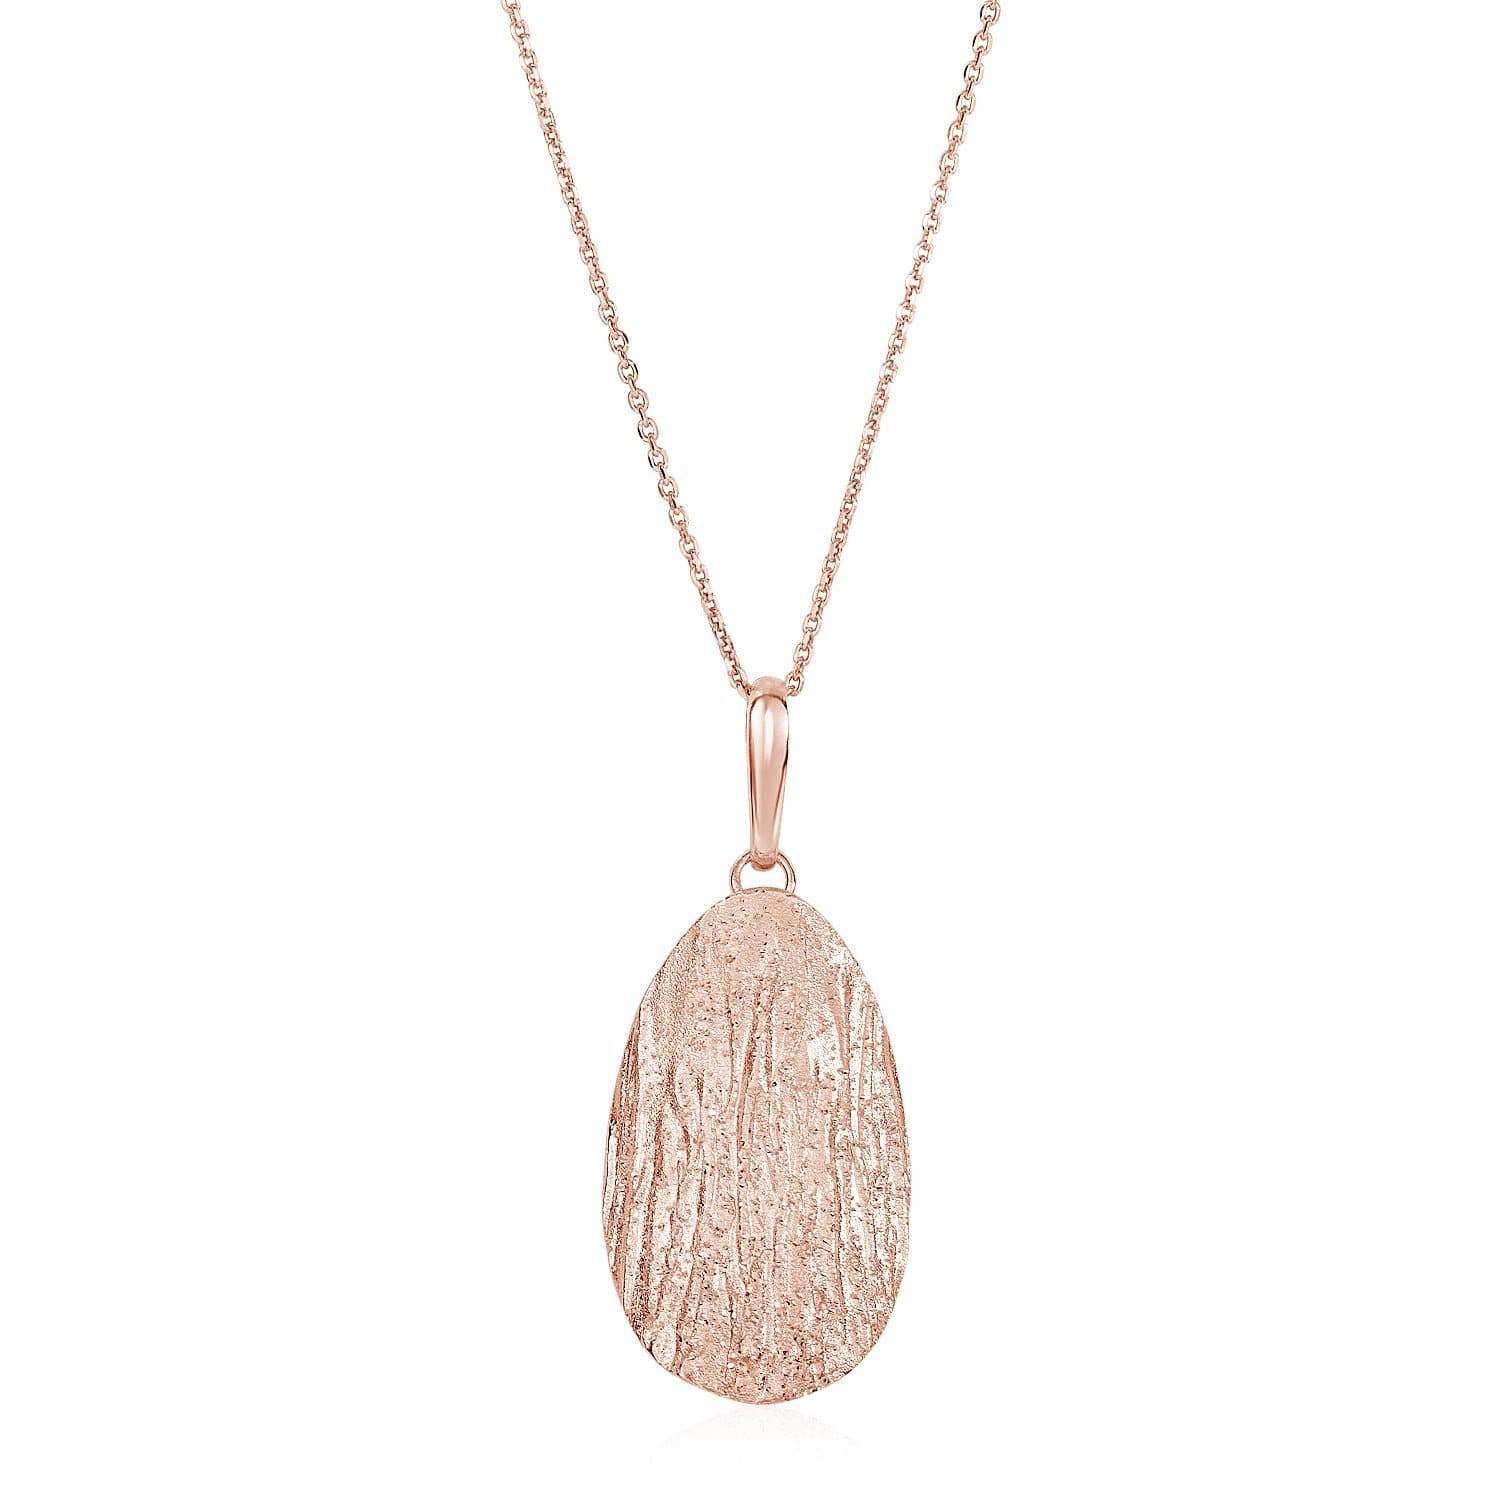 Textured Oval Pendant with Rose Finish in Sterling Silver